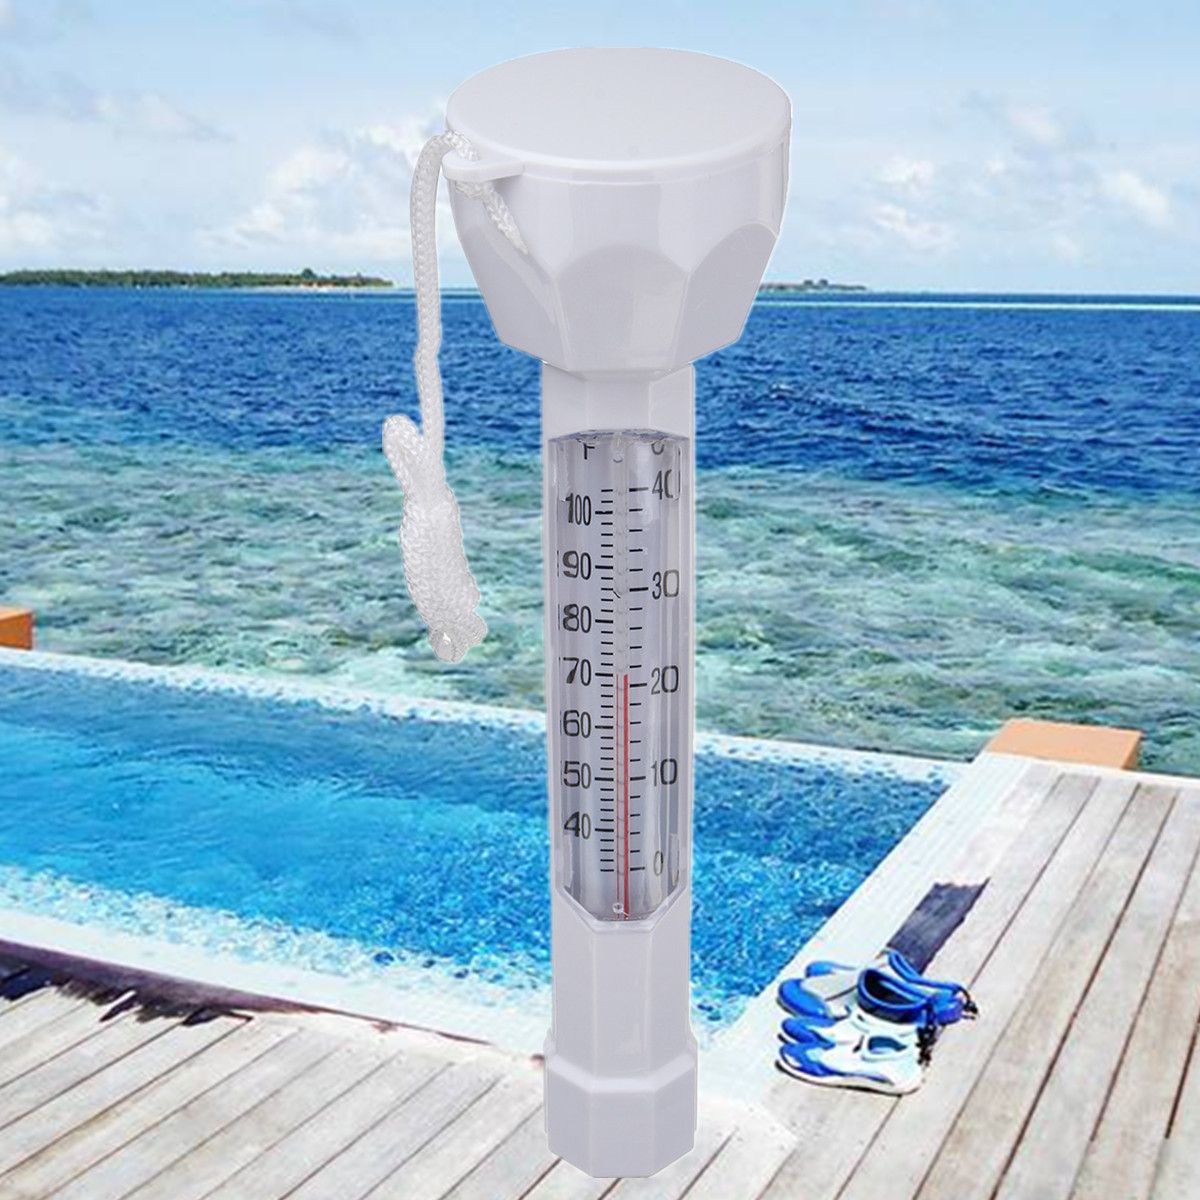 White-Floating-Water-Swimming-Pool-Bath-Spa-Hot-Tub-Temperature-Thermometer--1151459